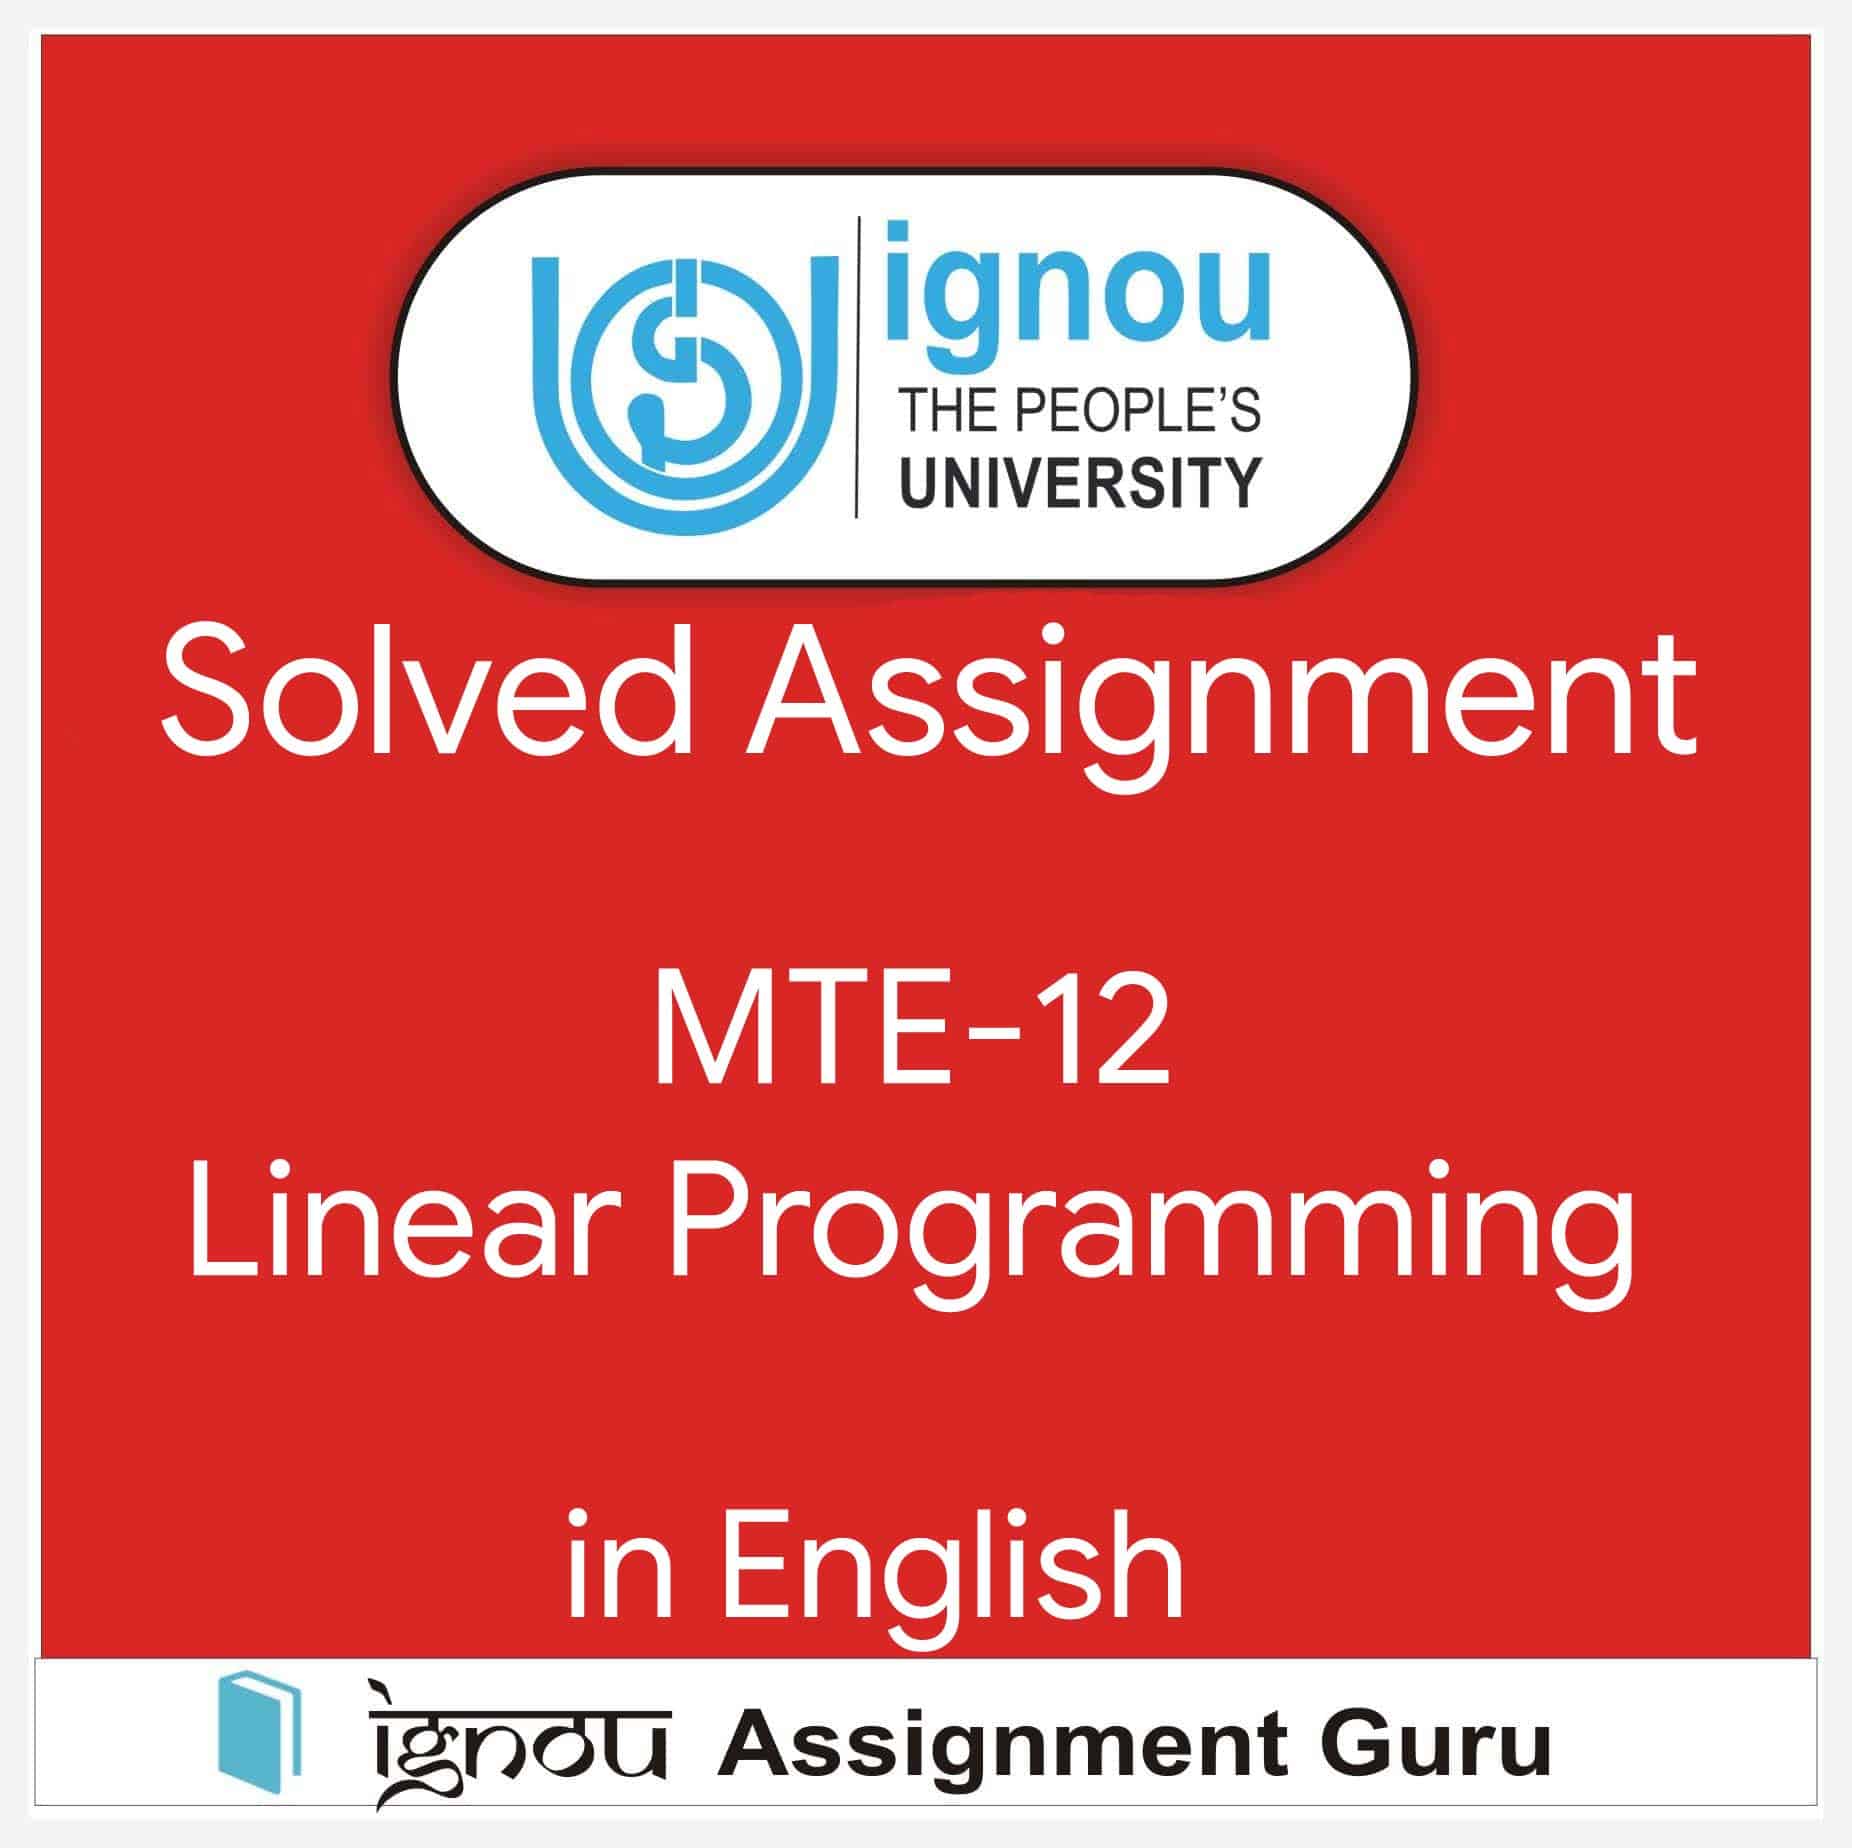 fst 01 solved assignment 2019 20